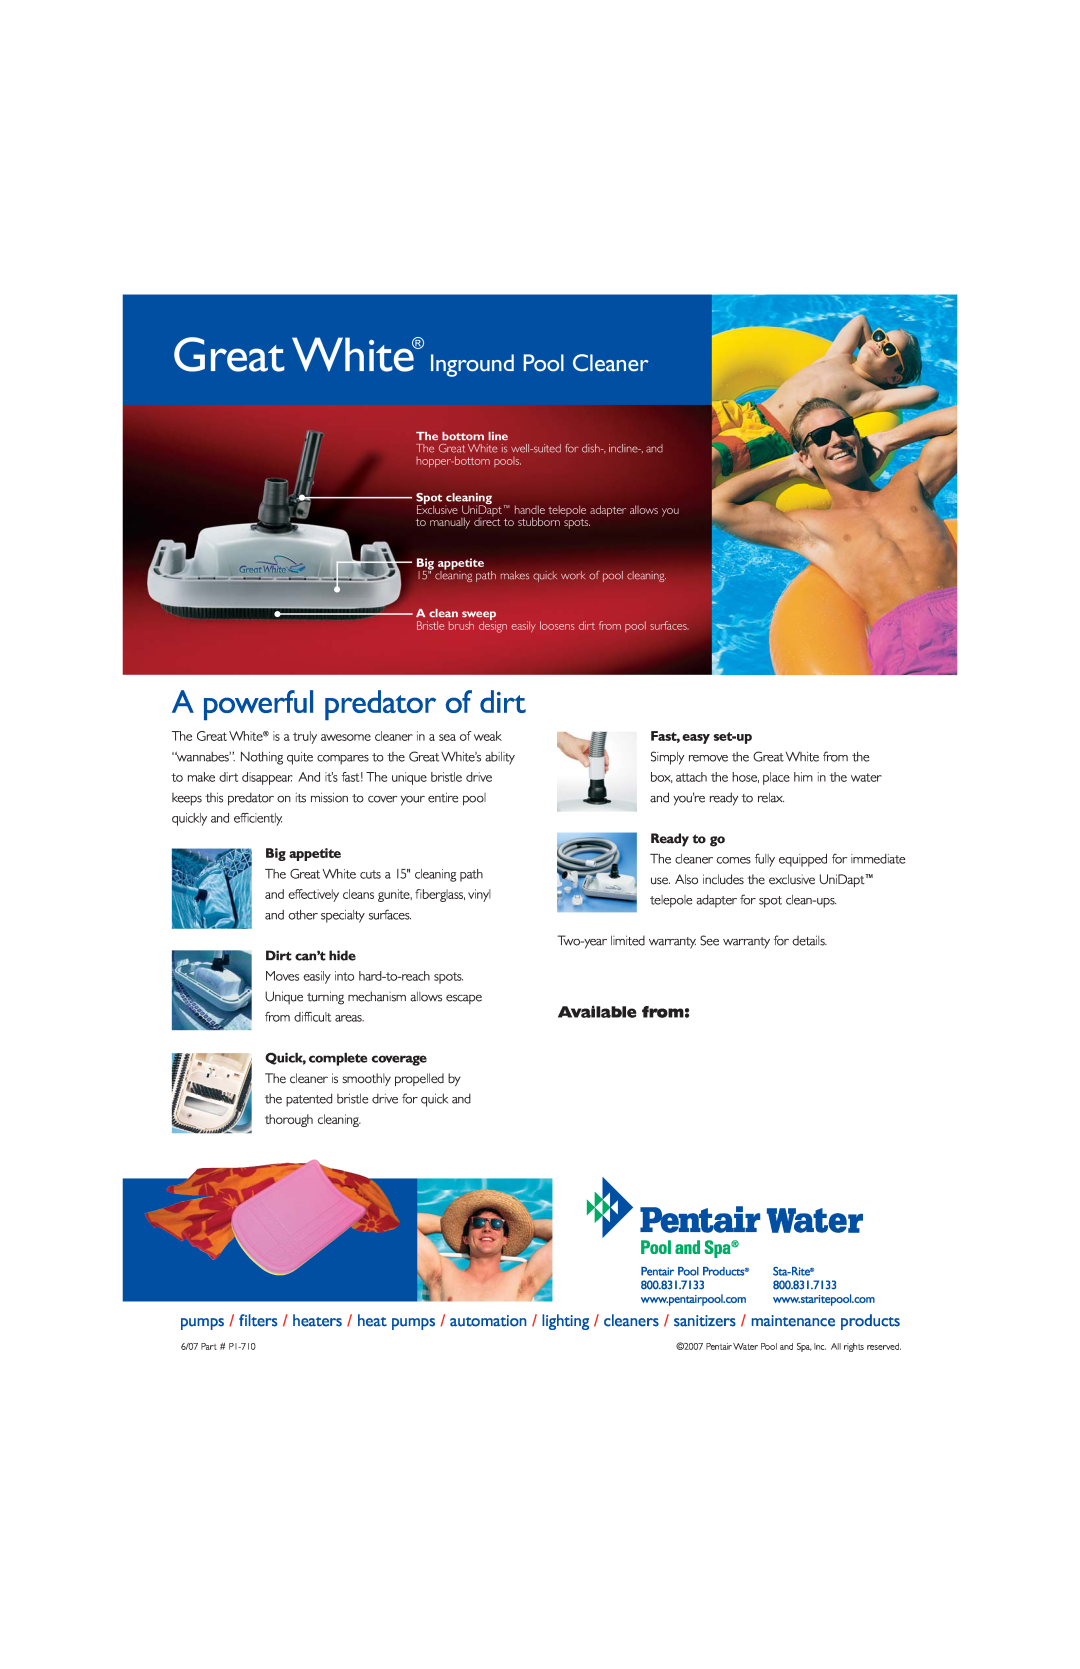 Pentair A powerful predator of dirt, Great White Inground Pool Cleaner, Available from, Big appetite, Dirt can’t hide 